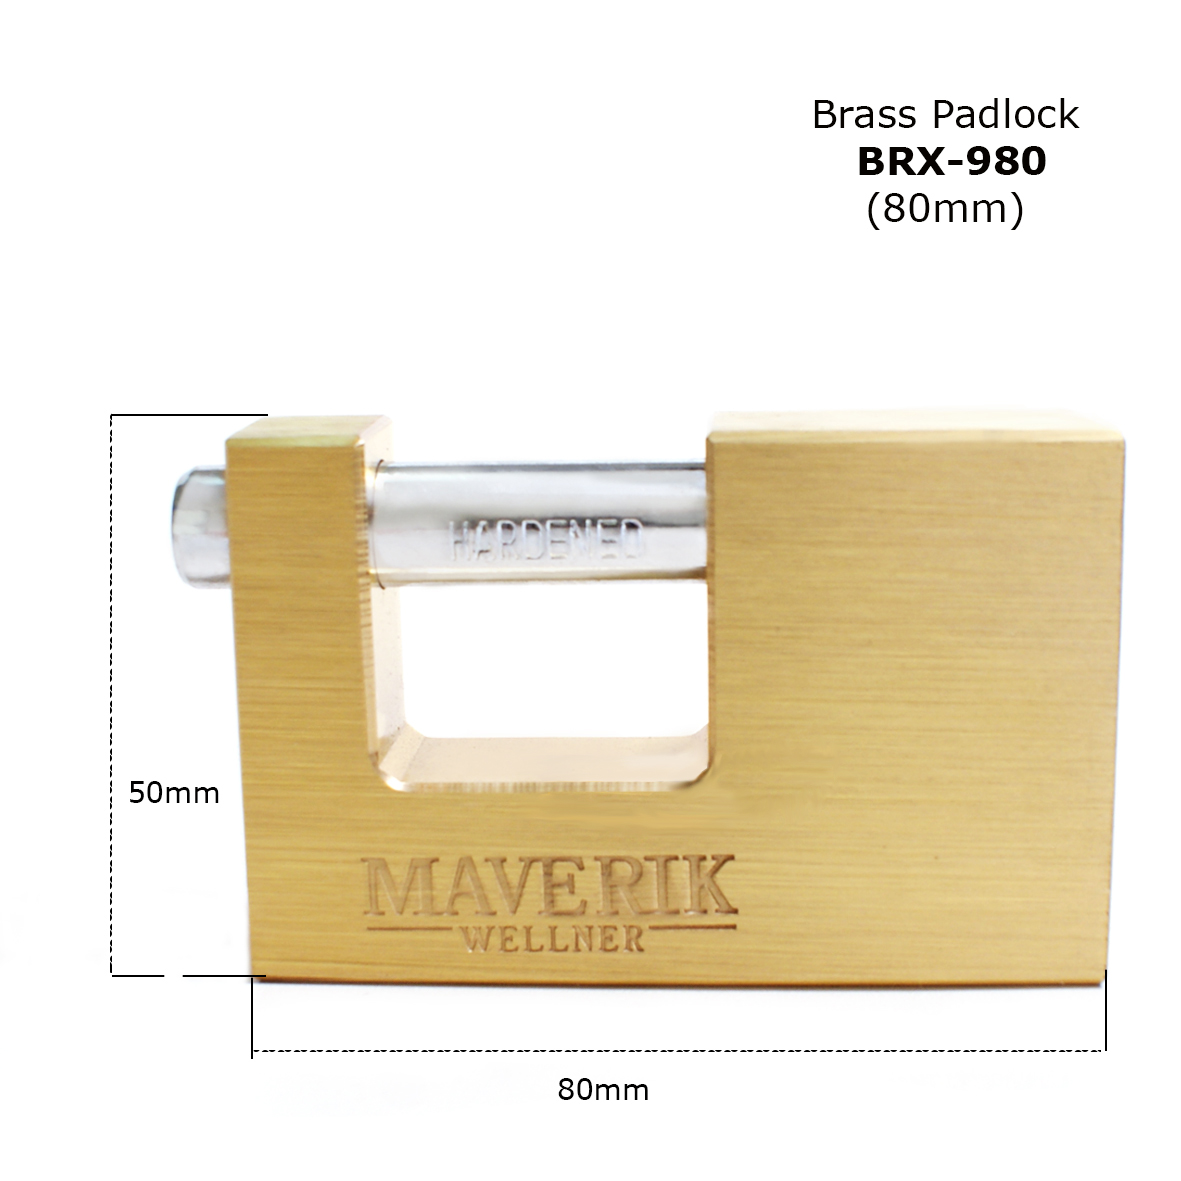 New arrival BRX-980 More strong & durable Solid brass padlock